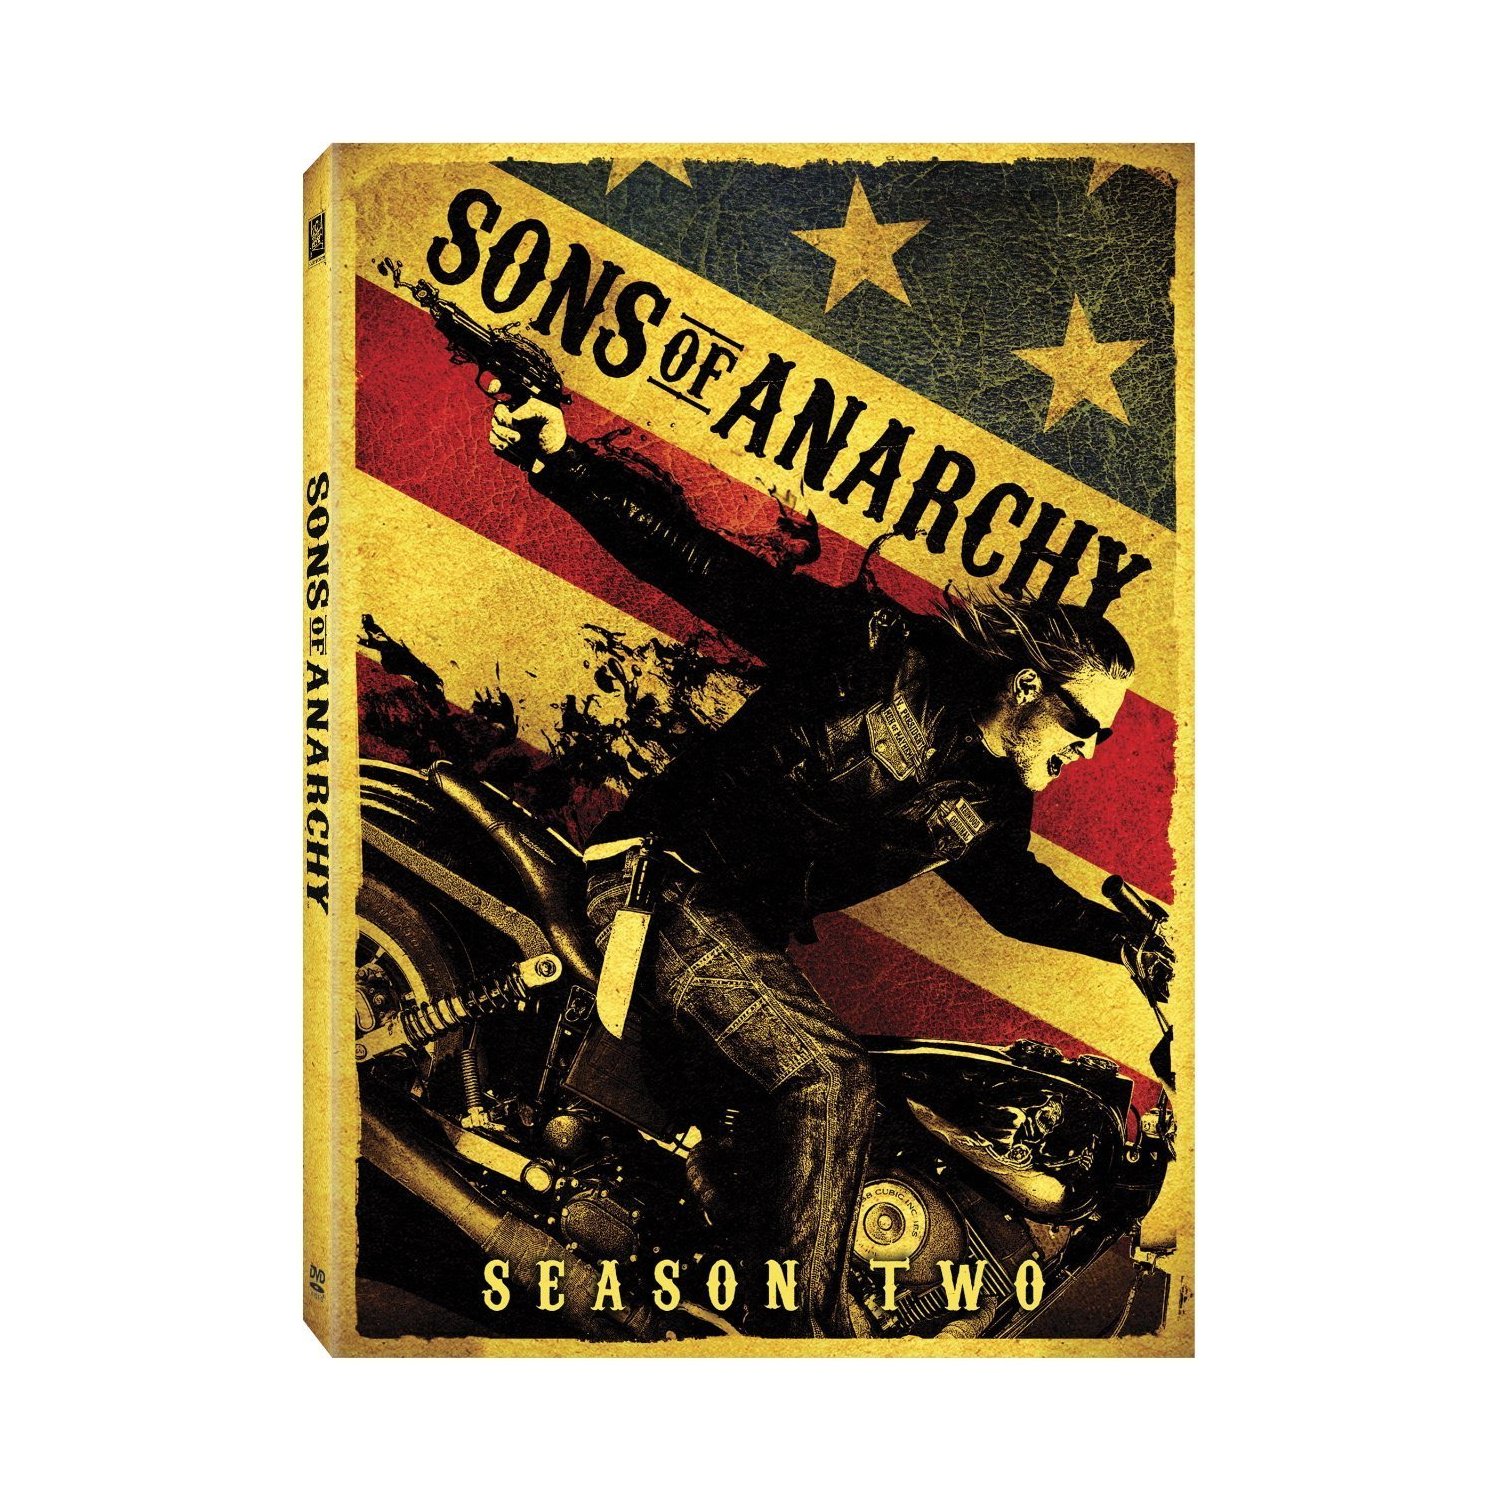 Sons of Anarchy Season 2 Disk 3